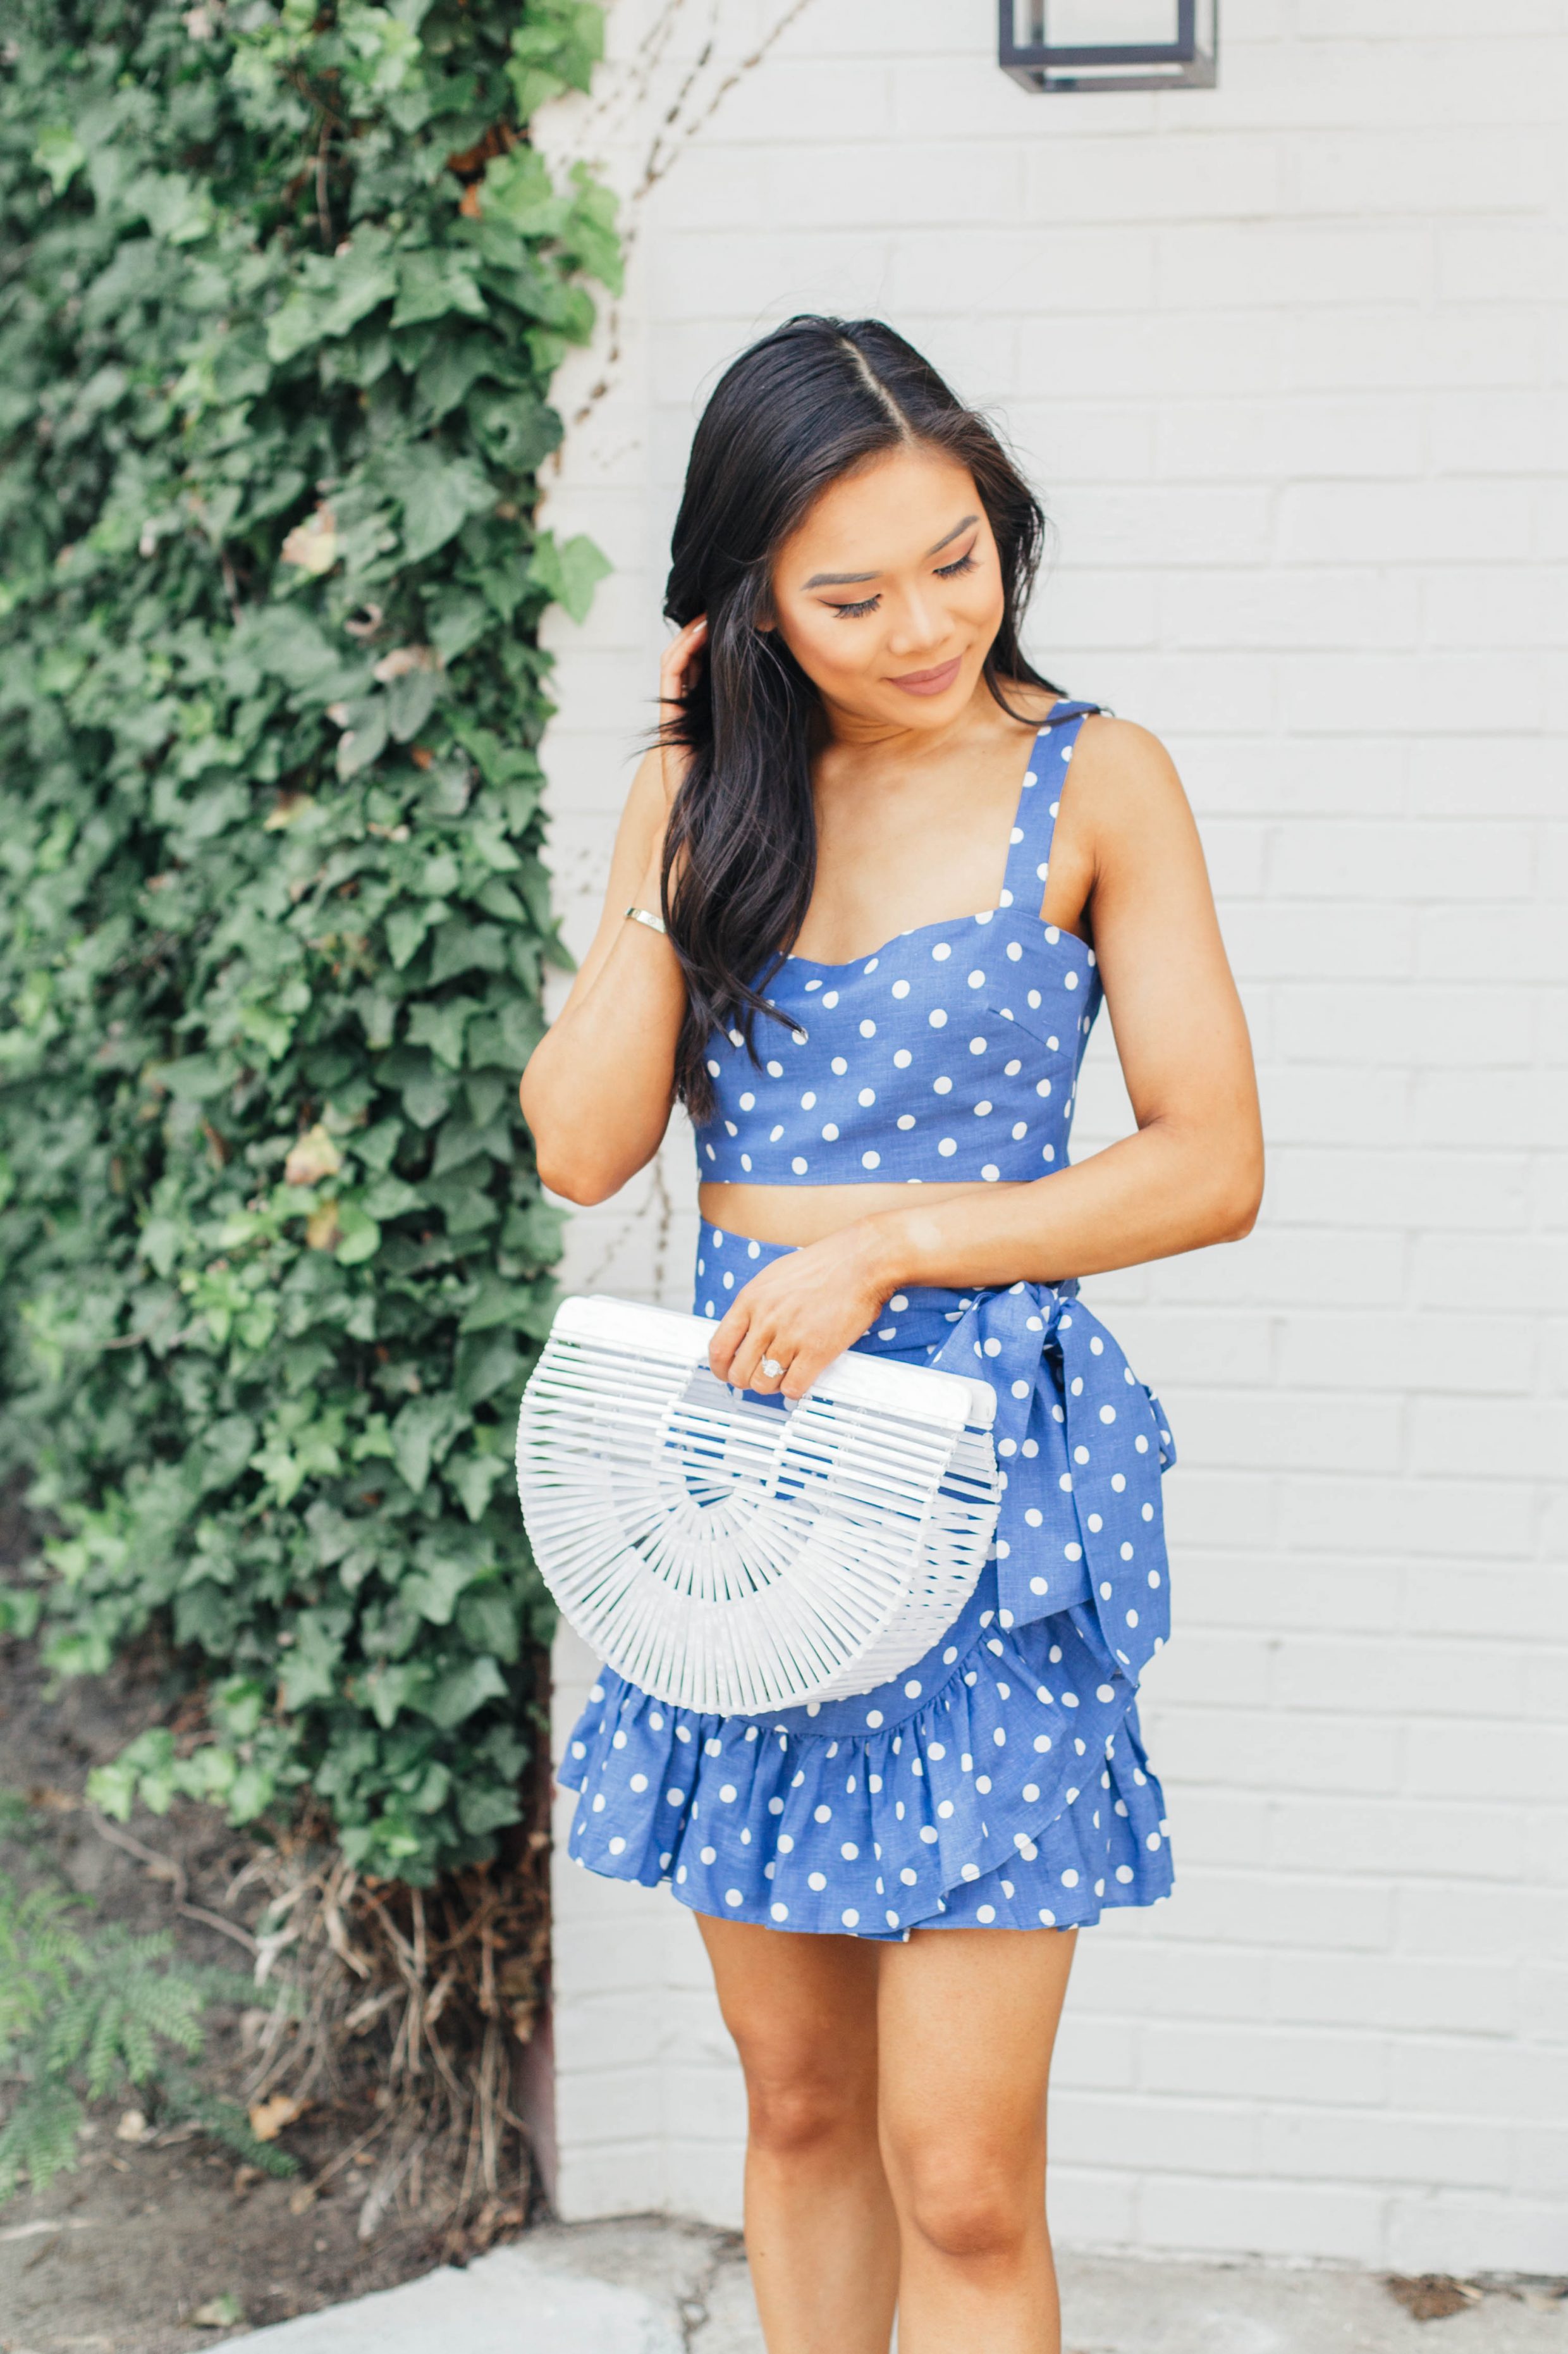 Blue polka-dot two piece set with white acrylic bag and suede sandals for a summer outfit